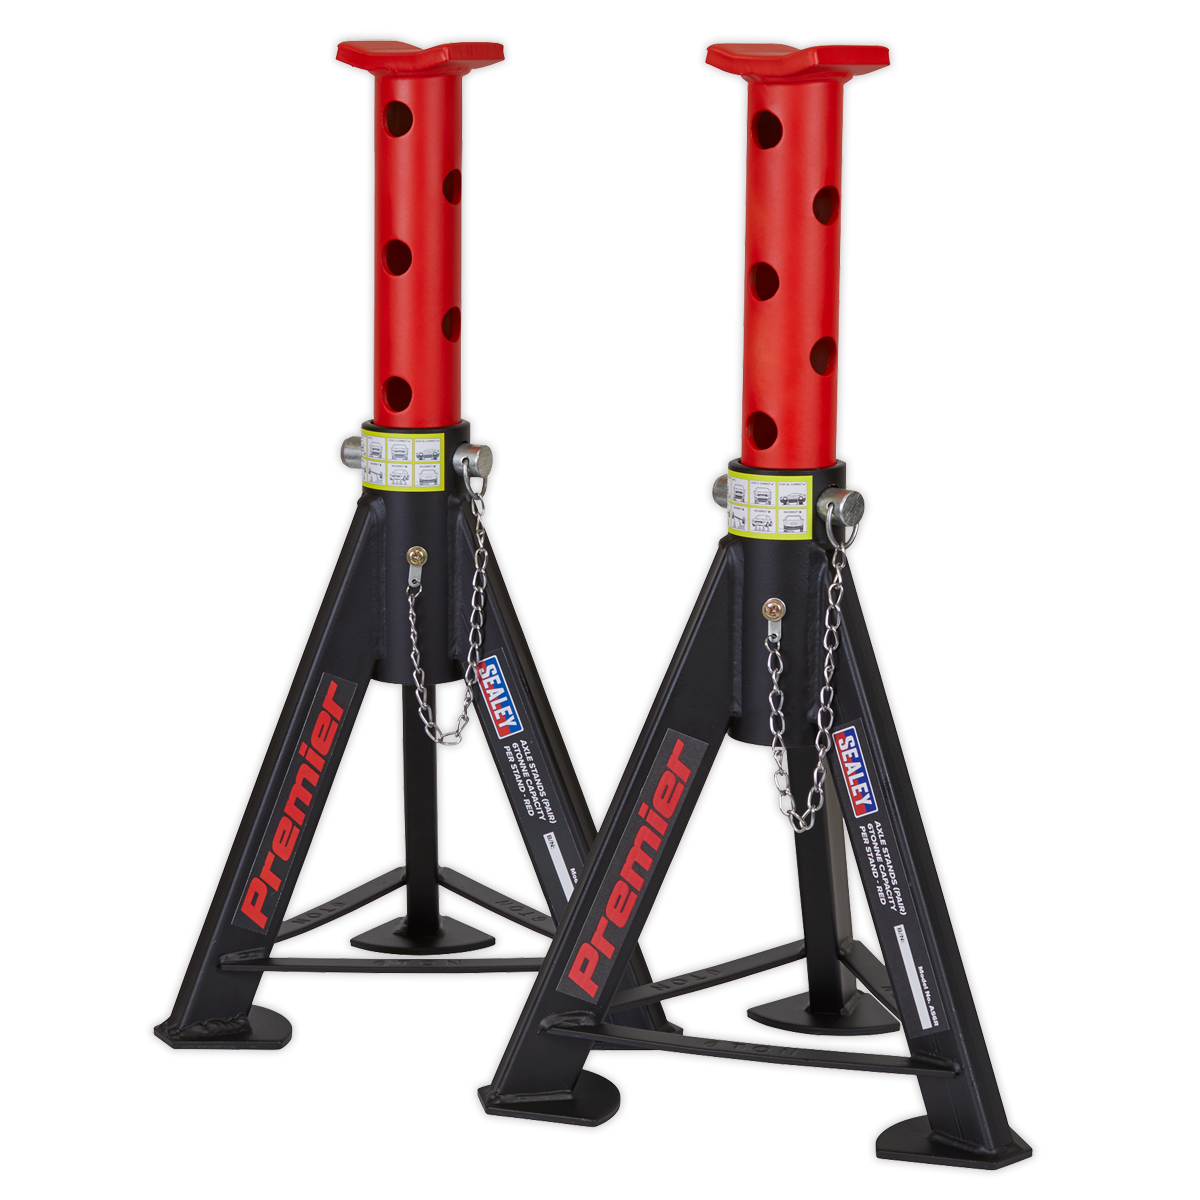 Axle Stands (Pair) 6 Tonne Capacity per Stand - Red - AS6R - Farming Parts